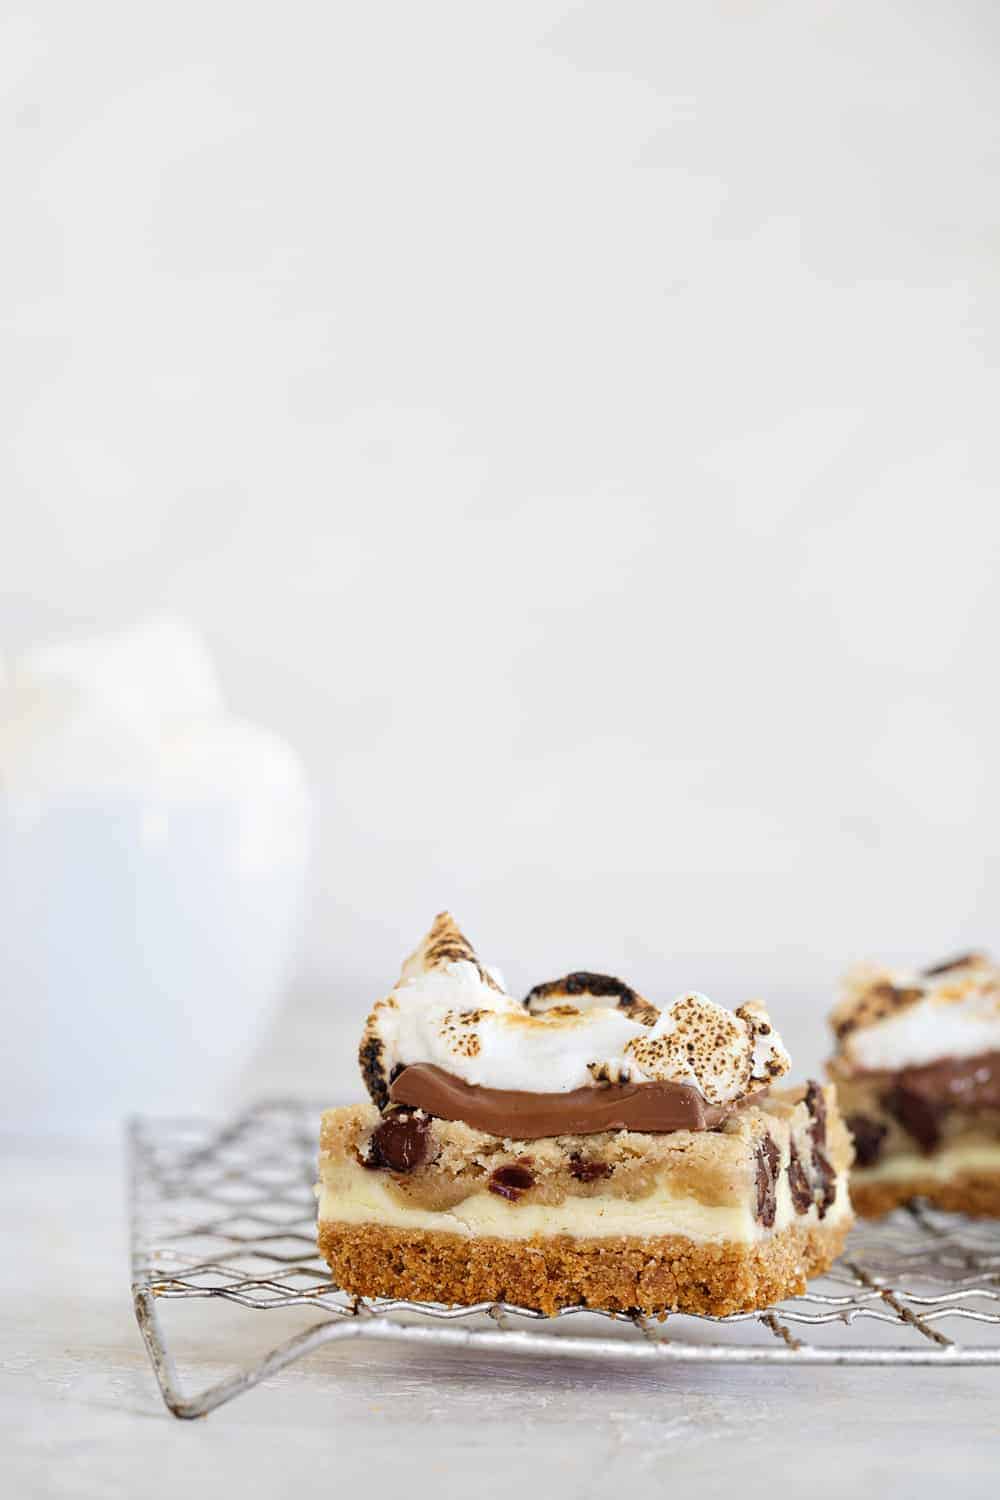 Cookie Dough Cheesecake S'mores combine three classics into one incredible desserts. You guys are going to LOVE this one.